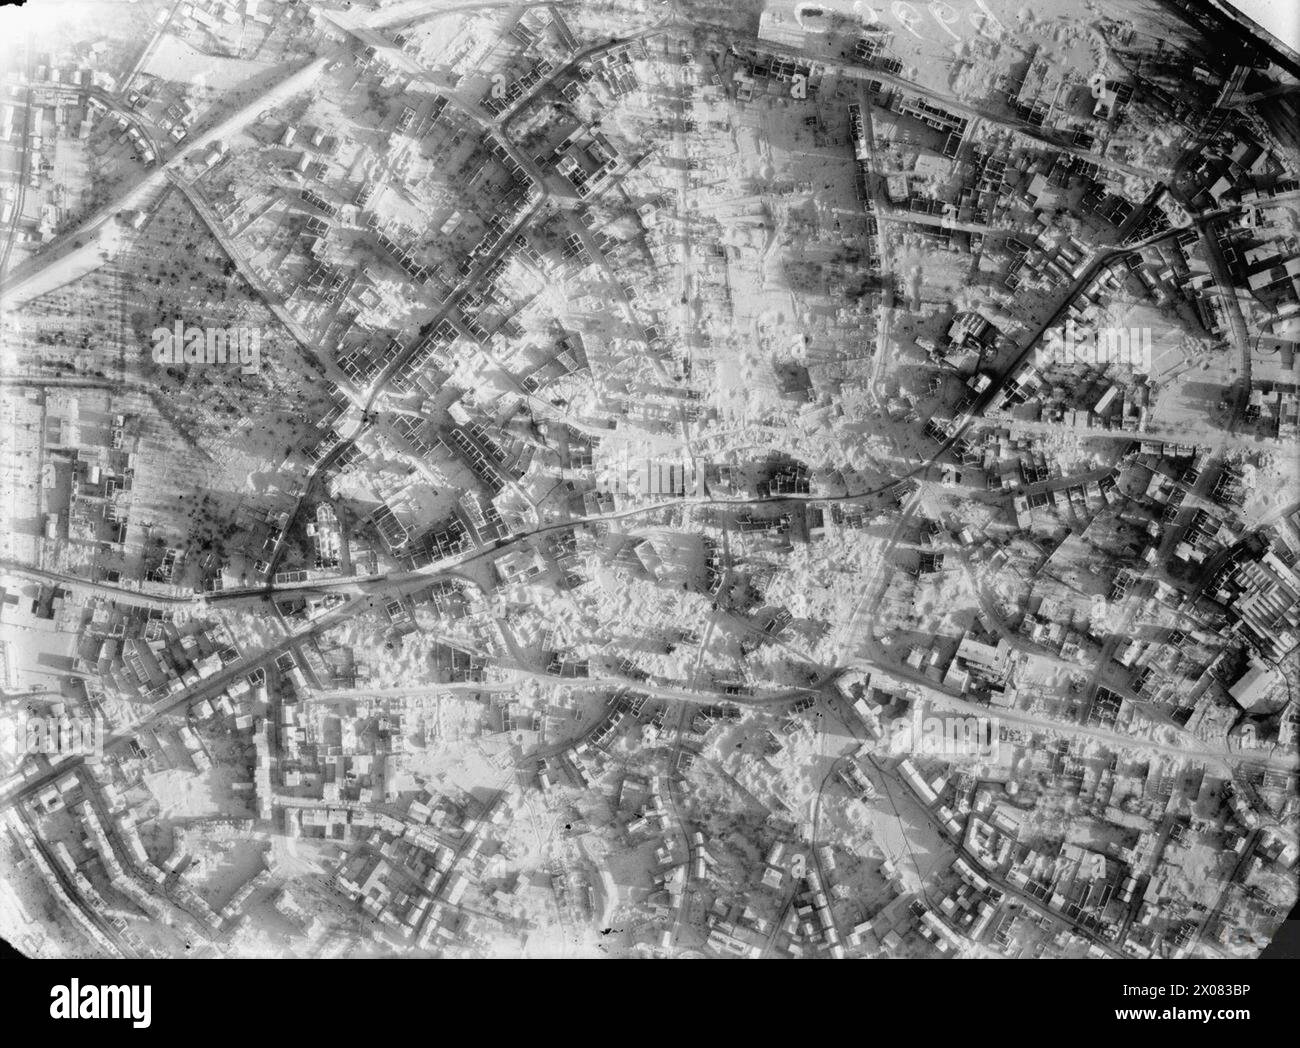 ROYAL AIR FORCE: OPERATIONS BY THE PHOTOGRAPHIC RECONNAISSANCE UNITS, 1939-1945. - Vertical photographic-reconnaissance aerial showing the devastated town centre of Solingen, Germany, in the winter snow; the result of a daylight raid by 173 Avro Lancasters of No. 3 Group, Bomber Command. This successful attack was delivered using G-H blind-bombing radar because of the complete cloud cover over the target. 1,300 dwellings and 18 industrial buildings were destroyed and 1,600 more buildings severely damaged. Between 1,224 and 1,882 people were killed and a further 2,000 injured  Royal Air Force, Stock Photo